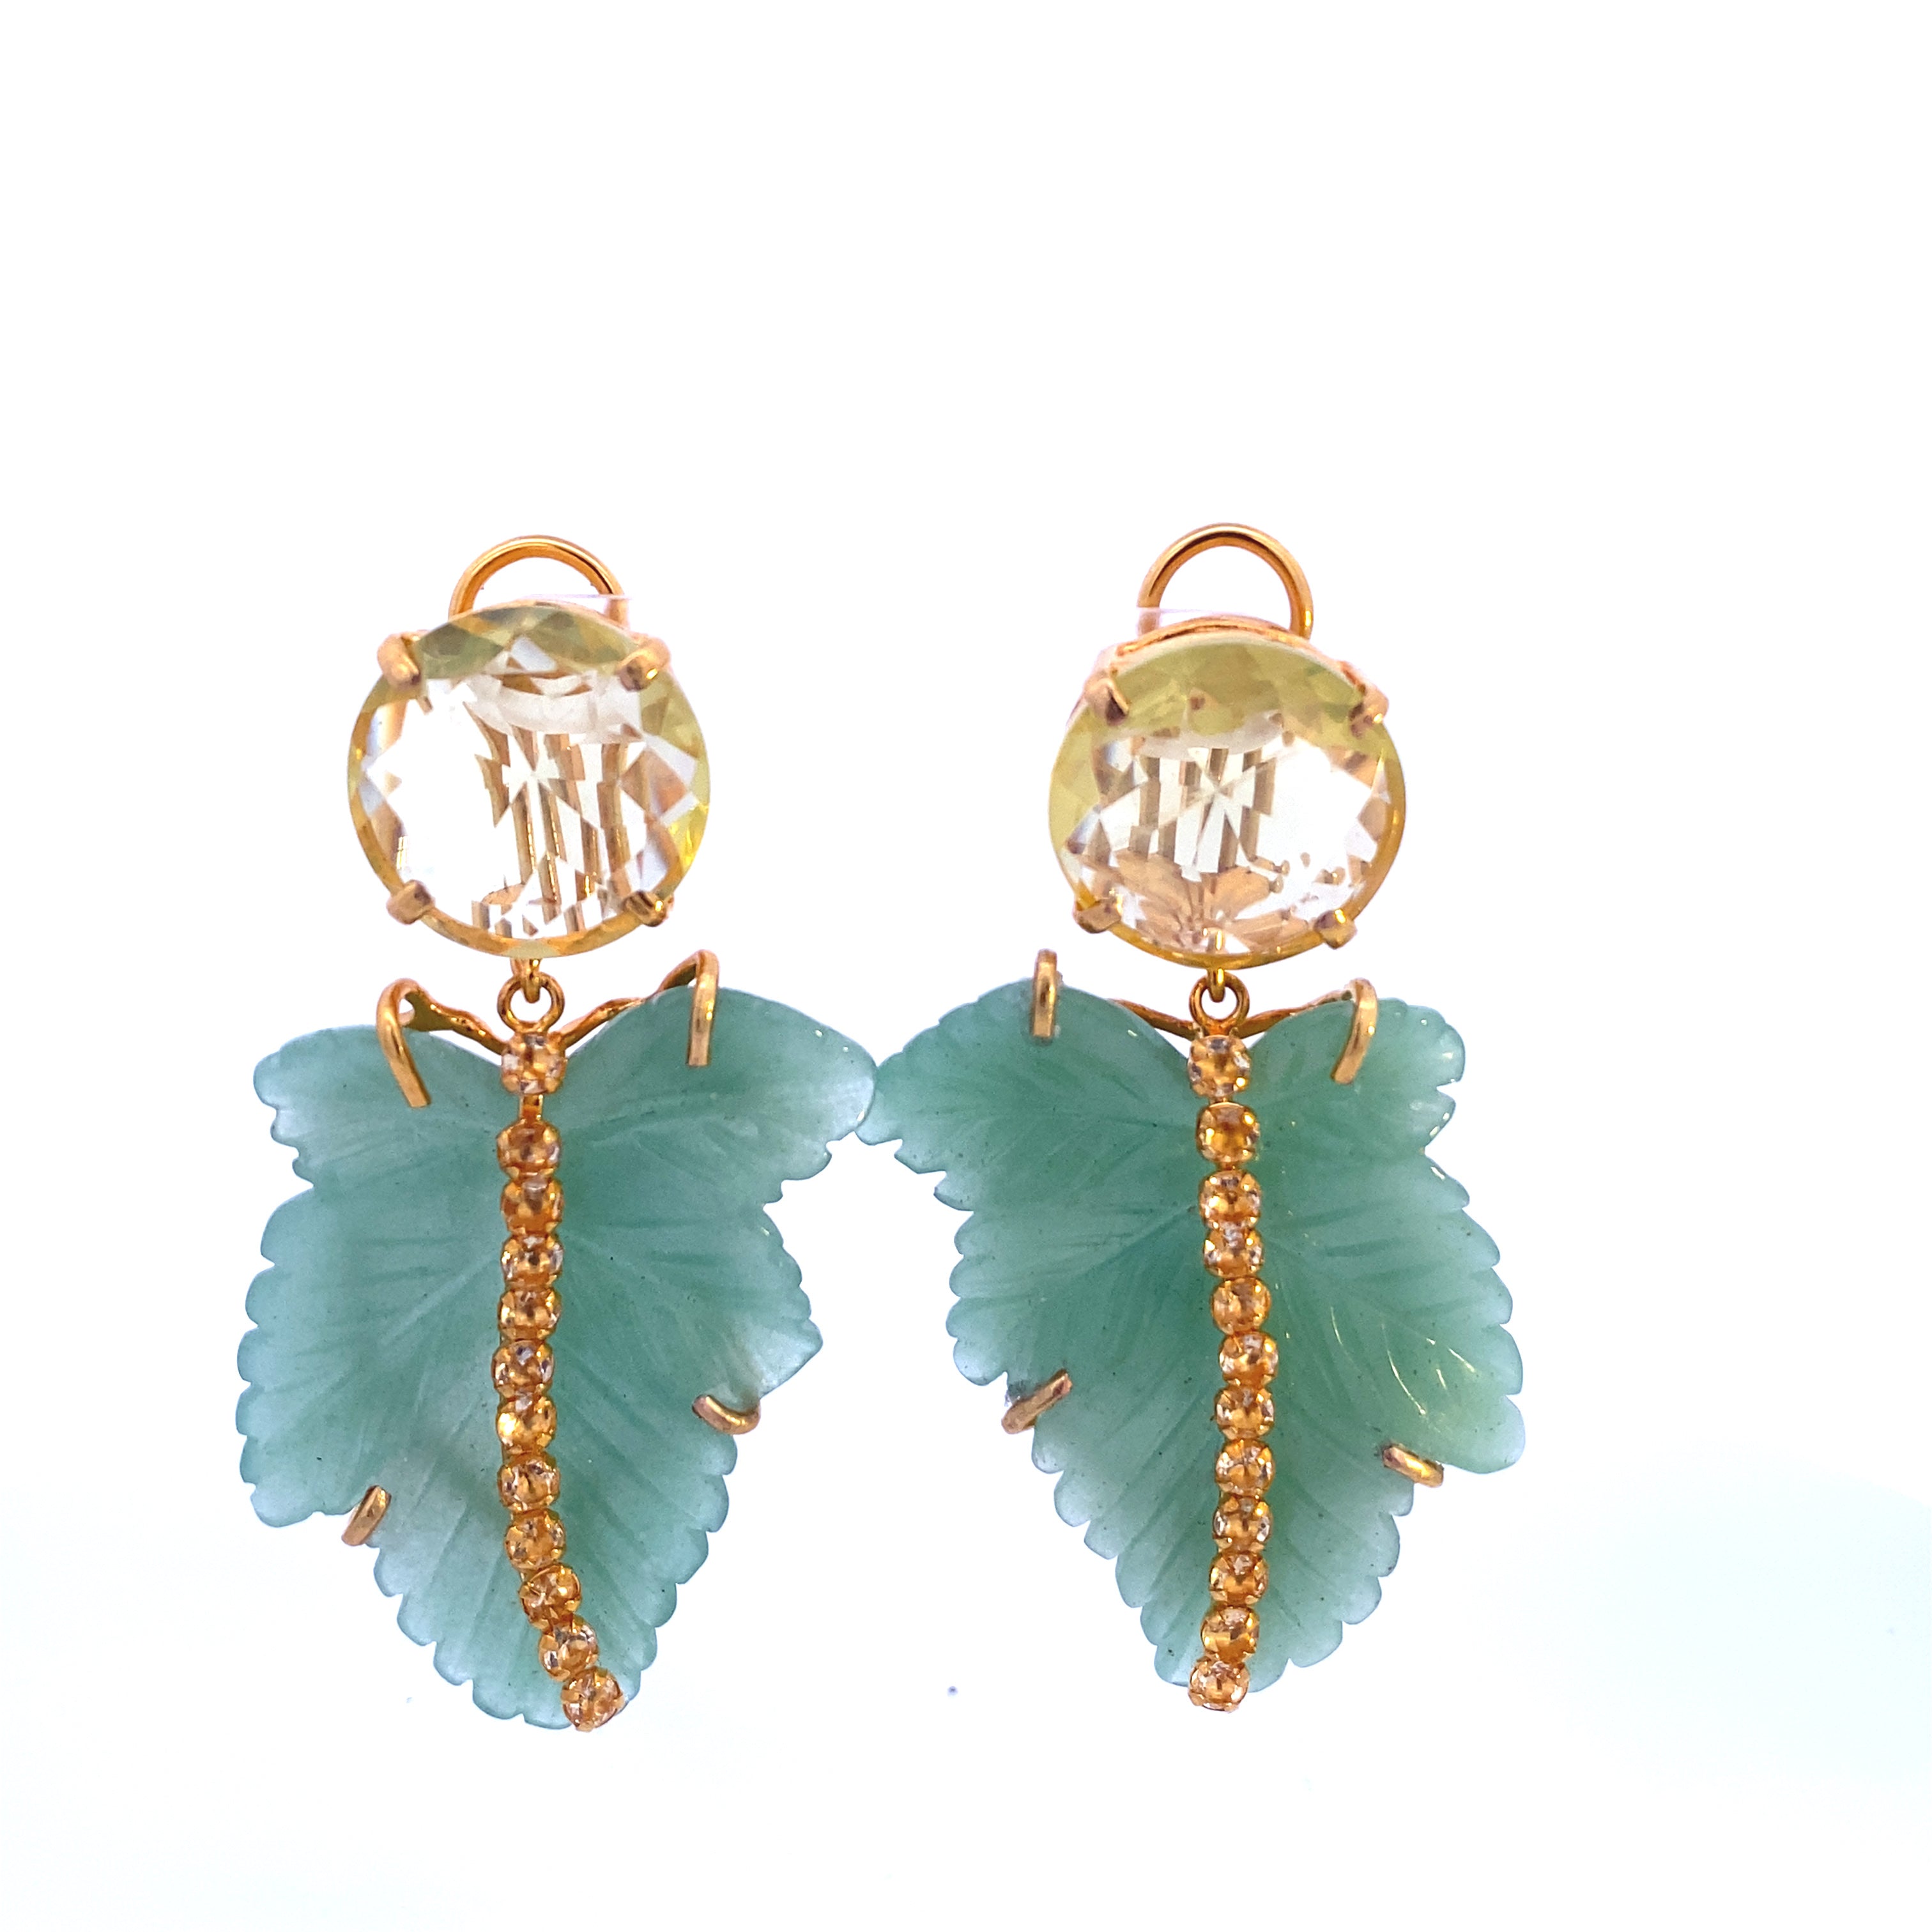 EARRINGS ROUND FACETED LEMON QUARTZ WITH CARVED GREEN AVENTURINE LEAF DROP